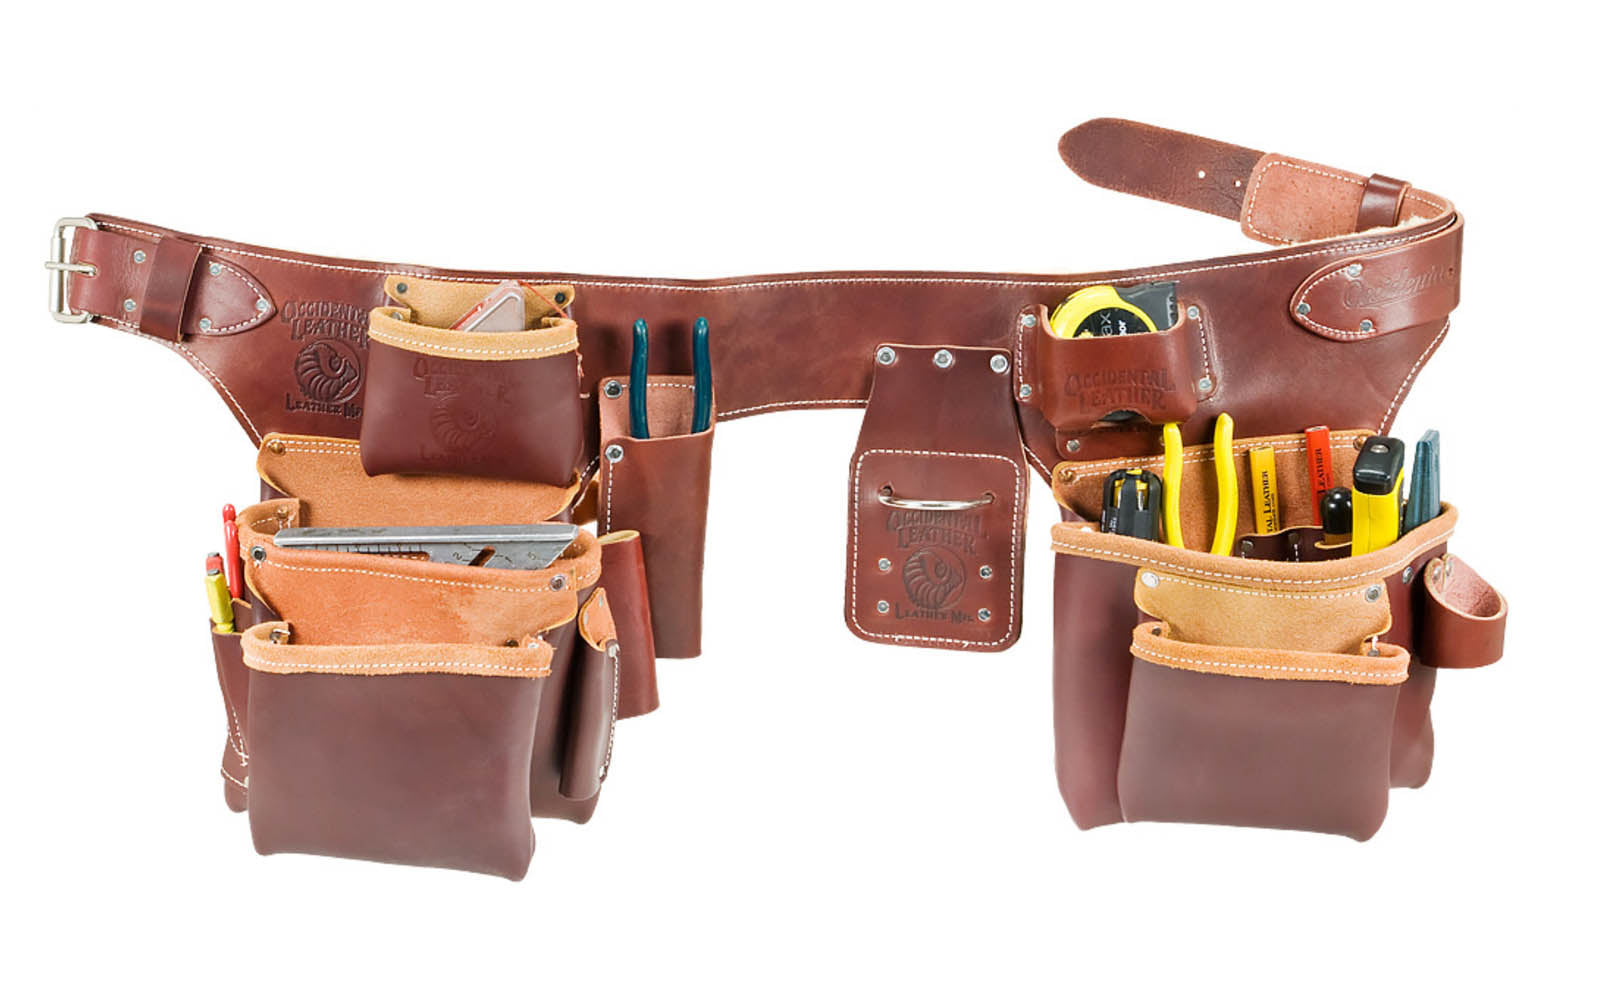 Occidental Leather "Pro Carpenter" 5-Bag Assembly Tool Belt Set Package ~ 5191 LG - 3" Large Ranger Work Belt - Premium Top-Grain Leather - Copper Rivets. Enhanced comfort with Sheepskin lining  - 21 Pockets & Tool Holders - 759244149807. "Pro Leather" series is made of top grain cow hides tanned with oils & waxes